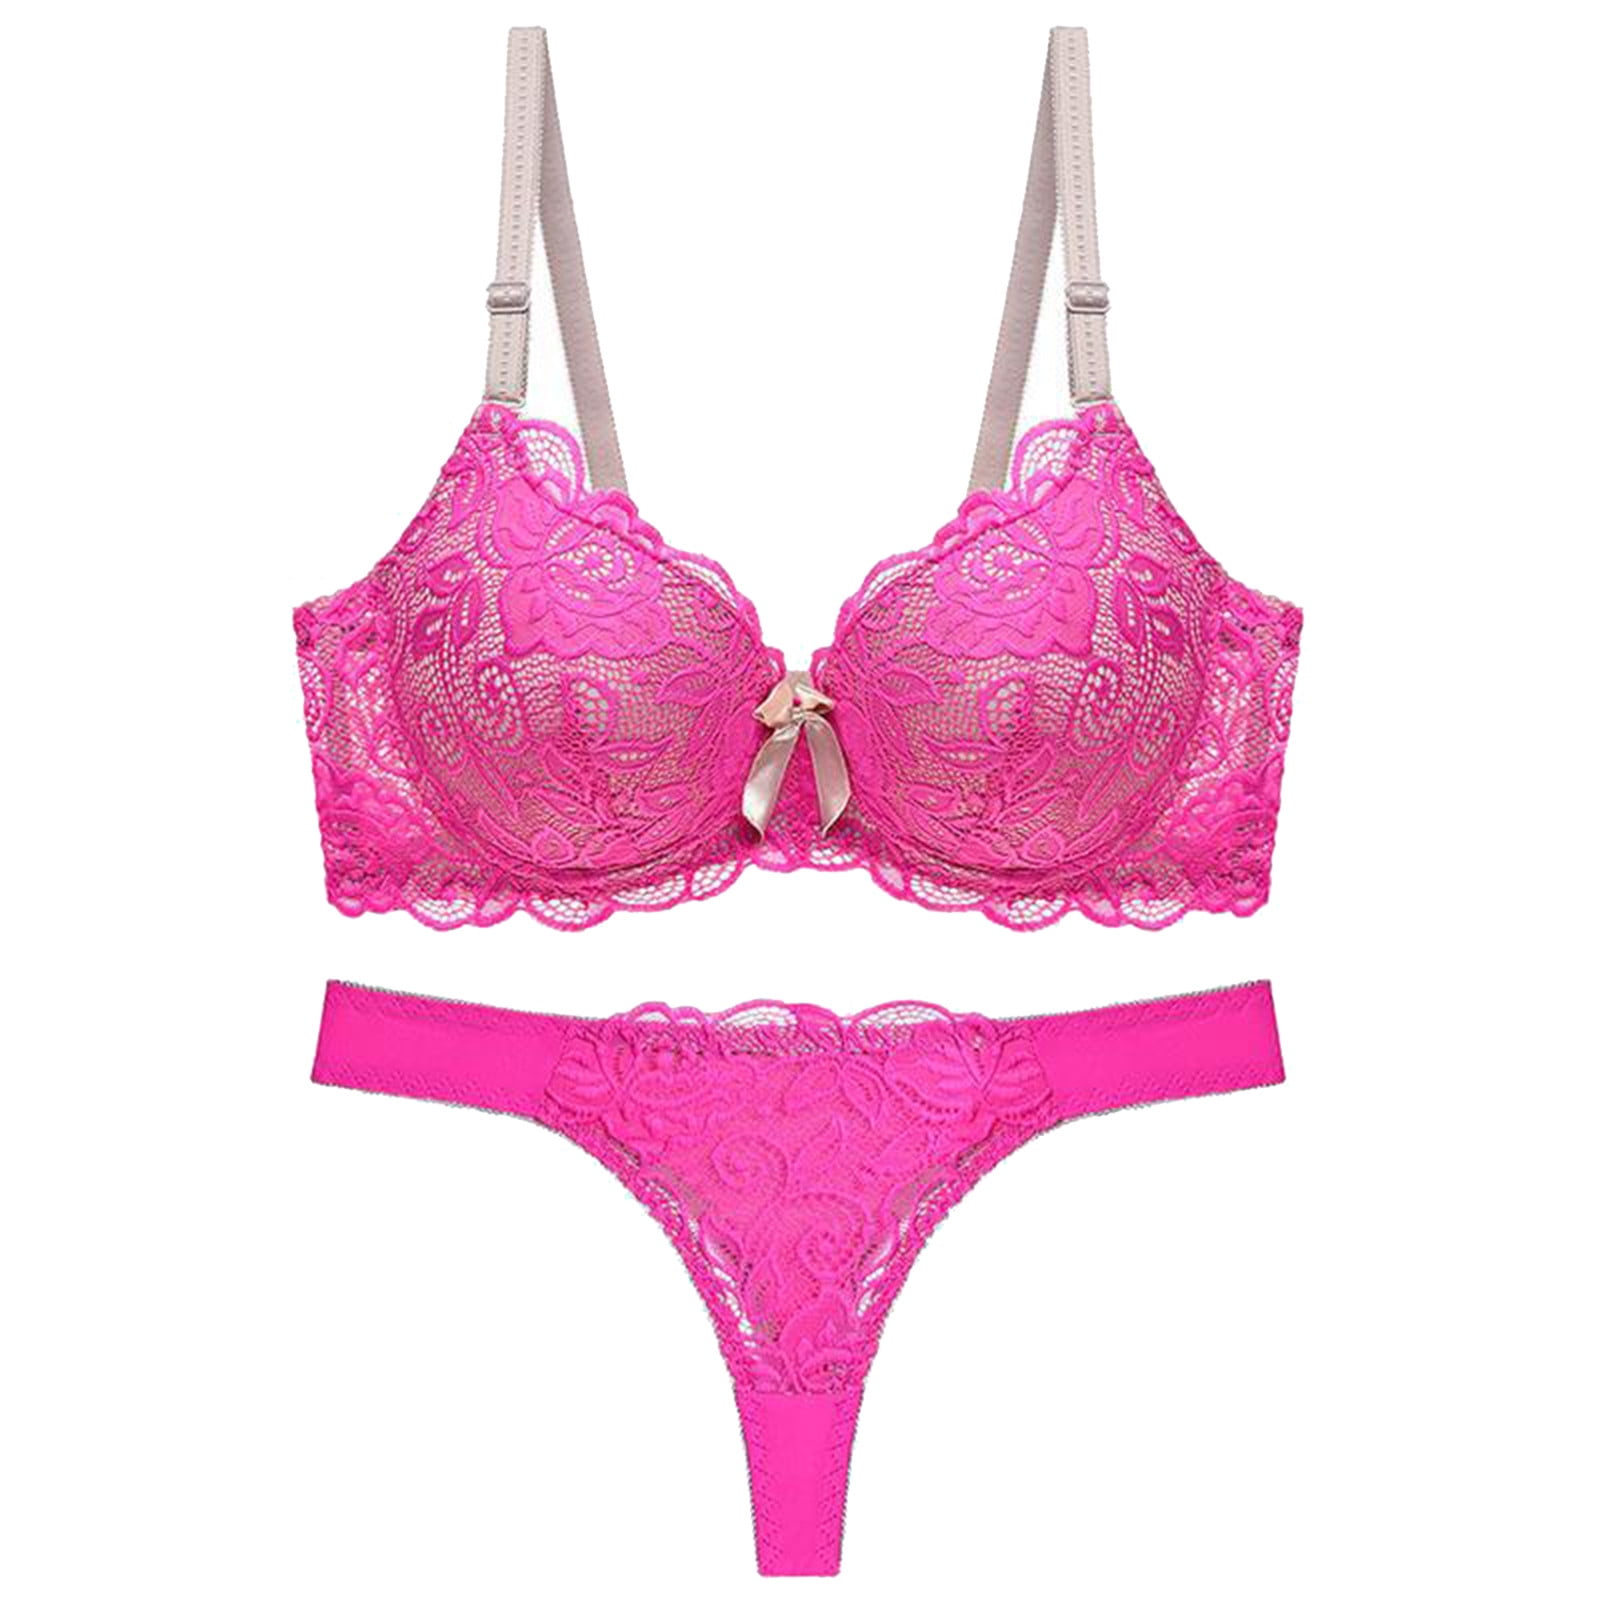 KYLIE PINK Women Girls Bras Panty Sets Underwear Lace Push Up Bras Thong Set  Lingerie Brallete Plus Size Candy Colors Bras Sets Y20011 I30Y# From  Firewinner, $10.39